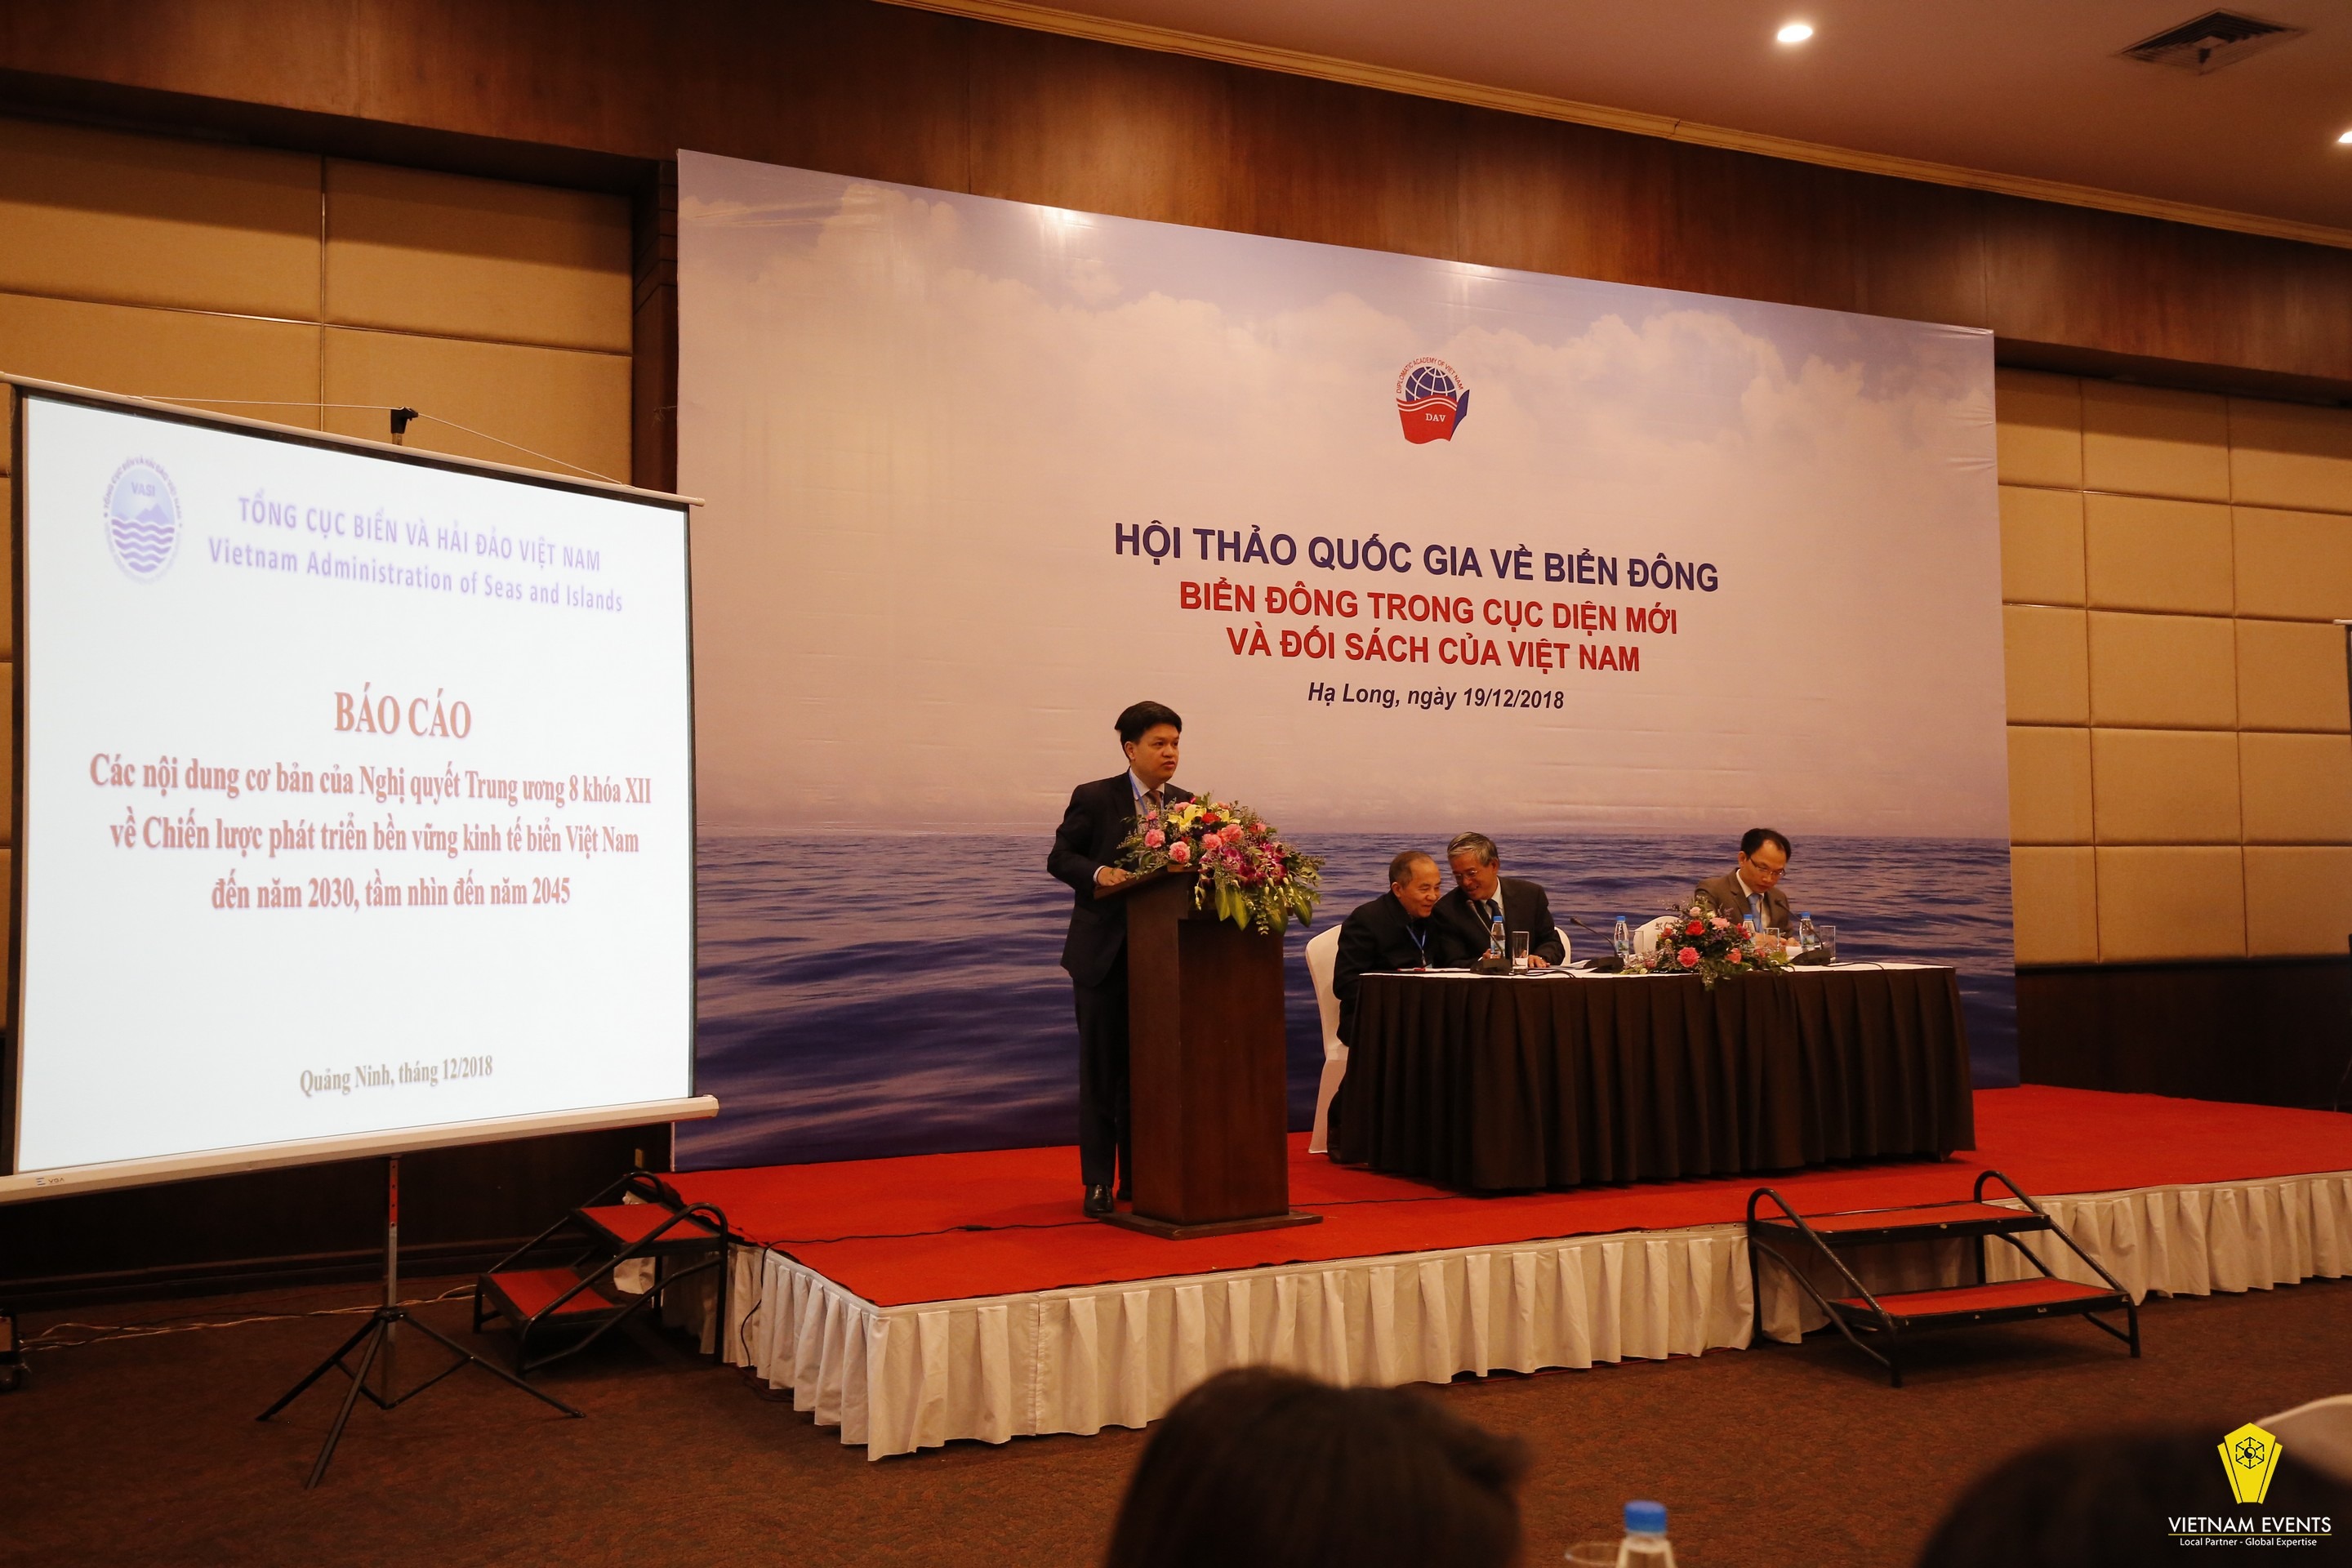 National Seminar on South China Sea took place on 18th December in Ha Long